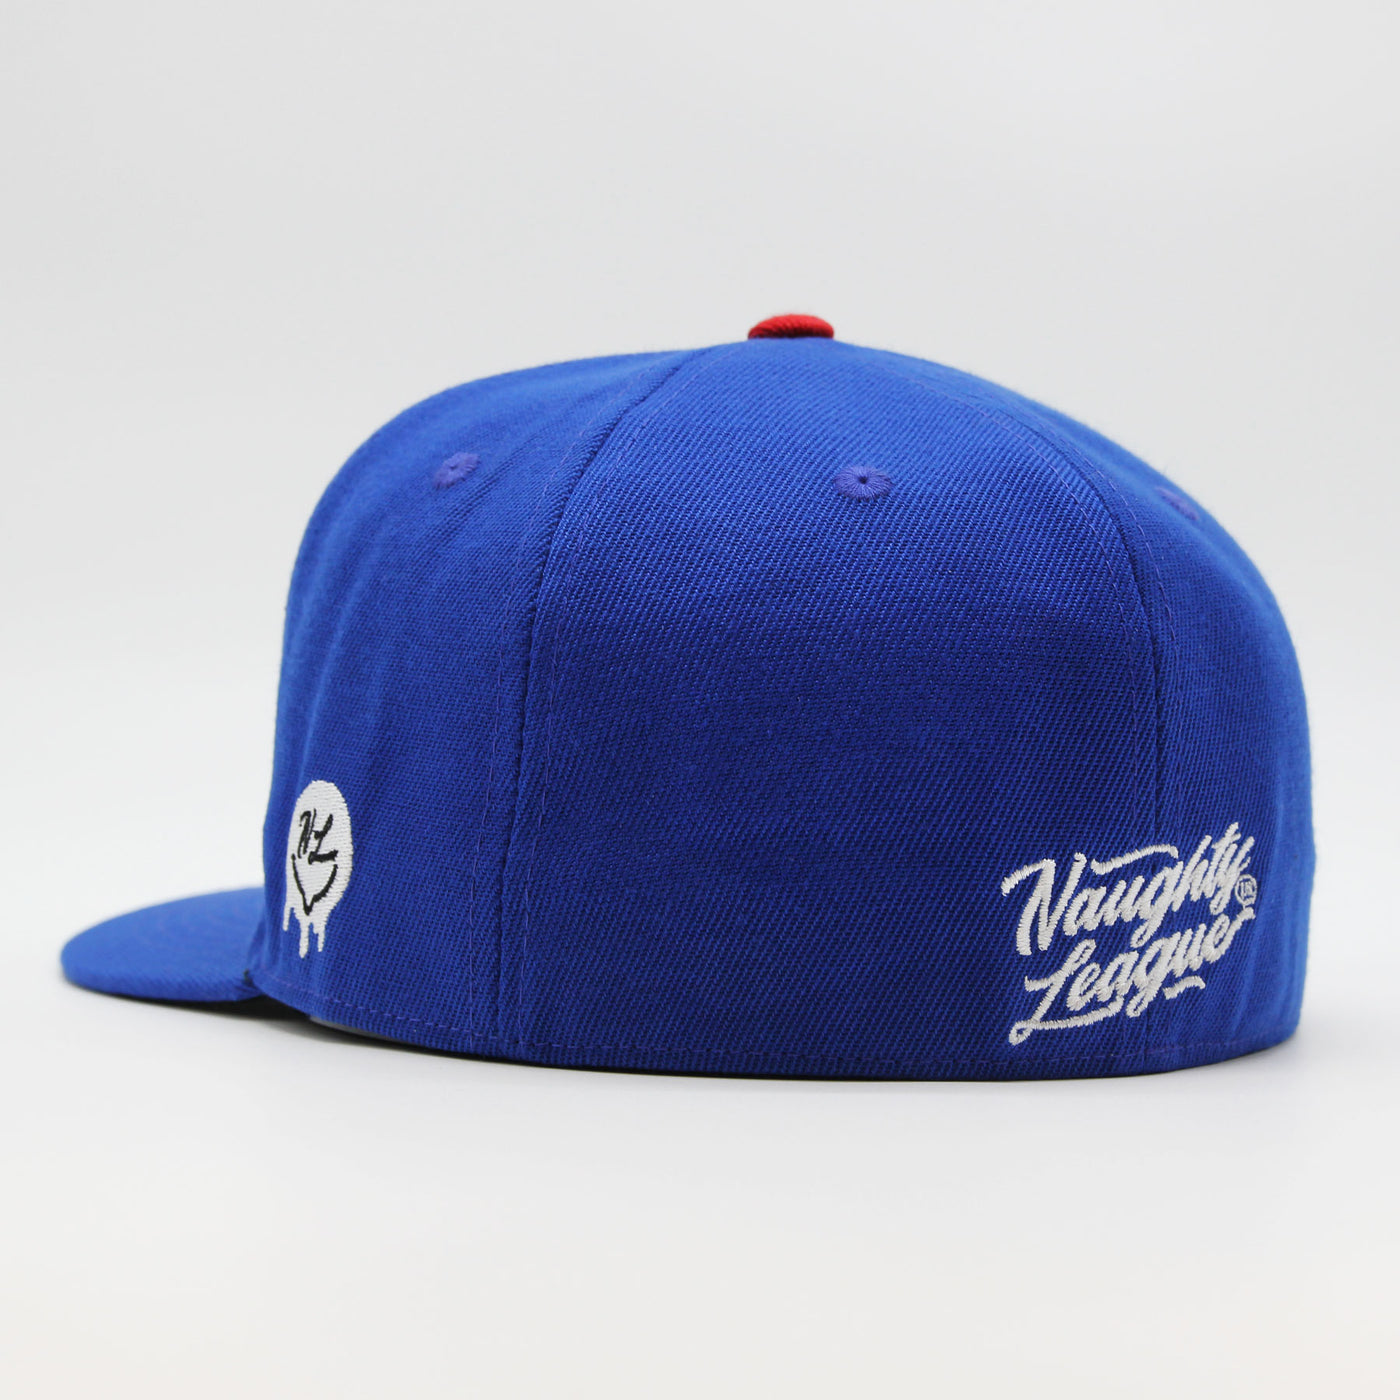 Naughty League South Central Original Gangsters fitted royal/red - Shop-Tetuan